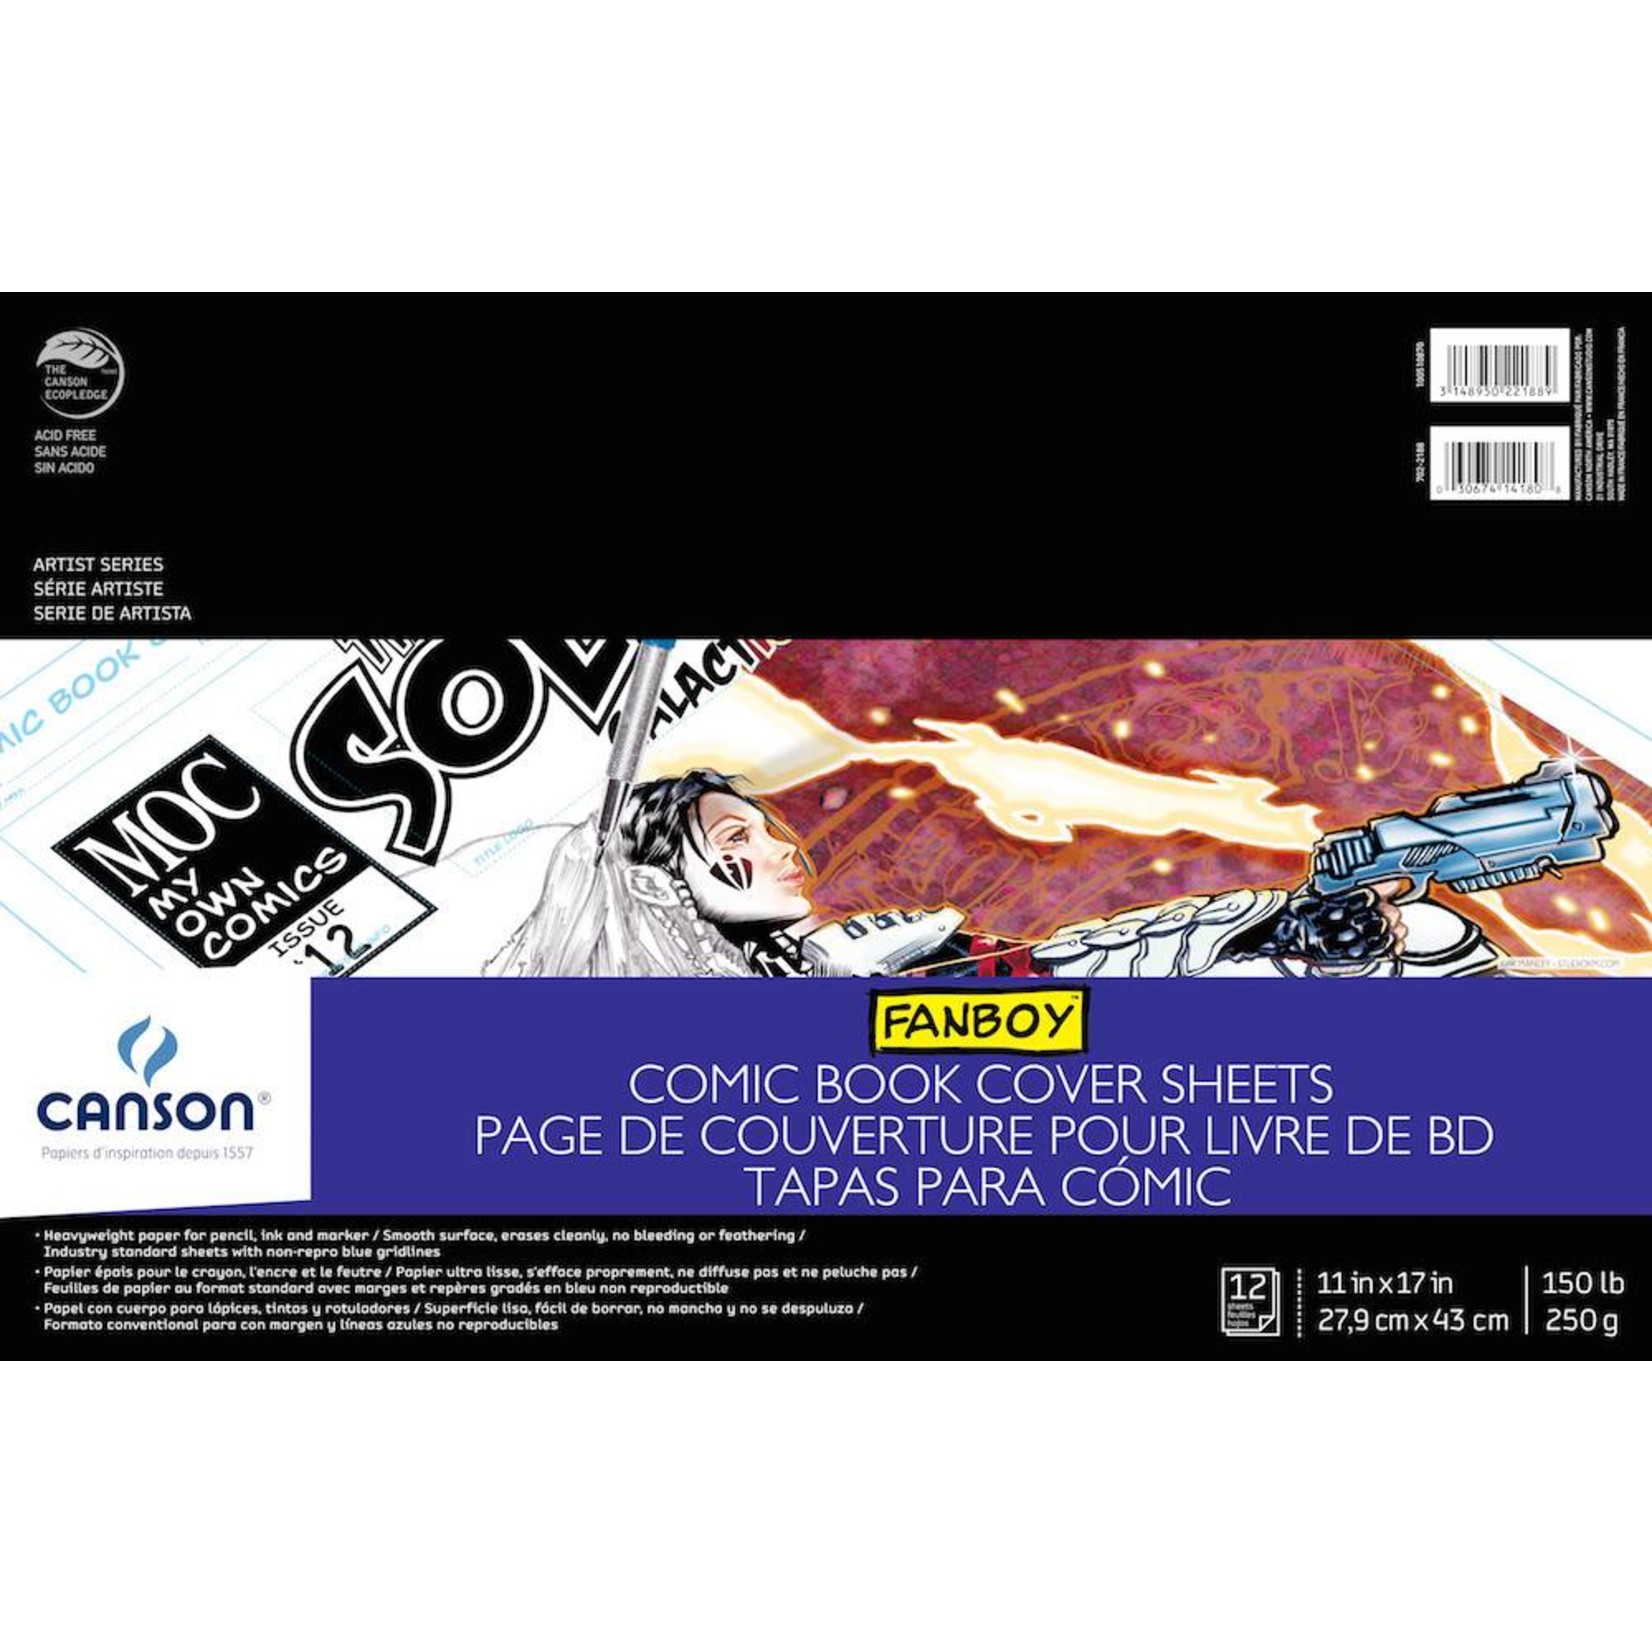 CANSON CANSON ARTIST SERIES COMIC BOOK COVER SHEETS 11X17 12/SHT    CAN-100510870